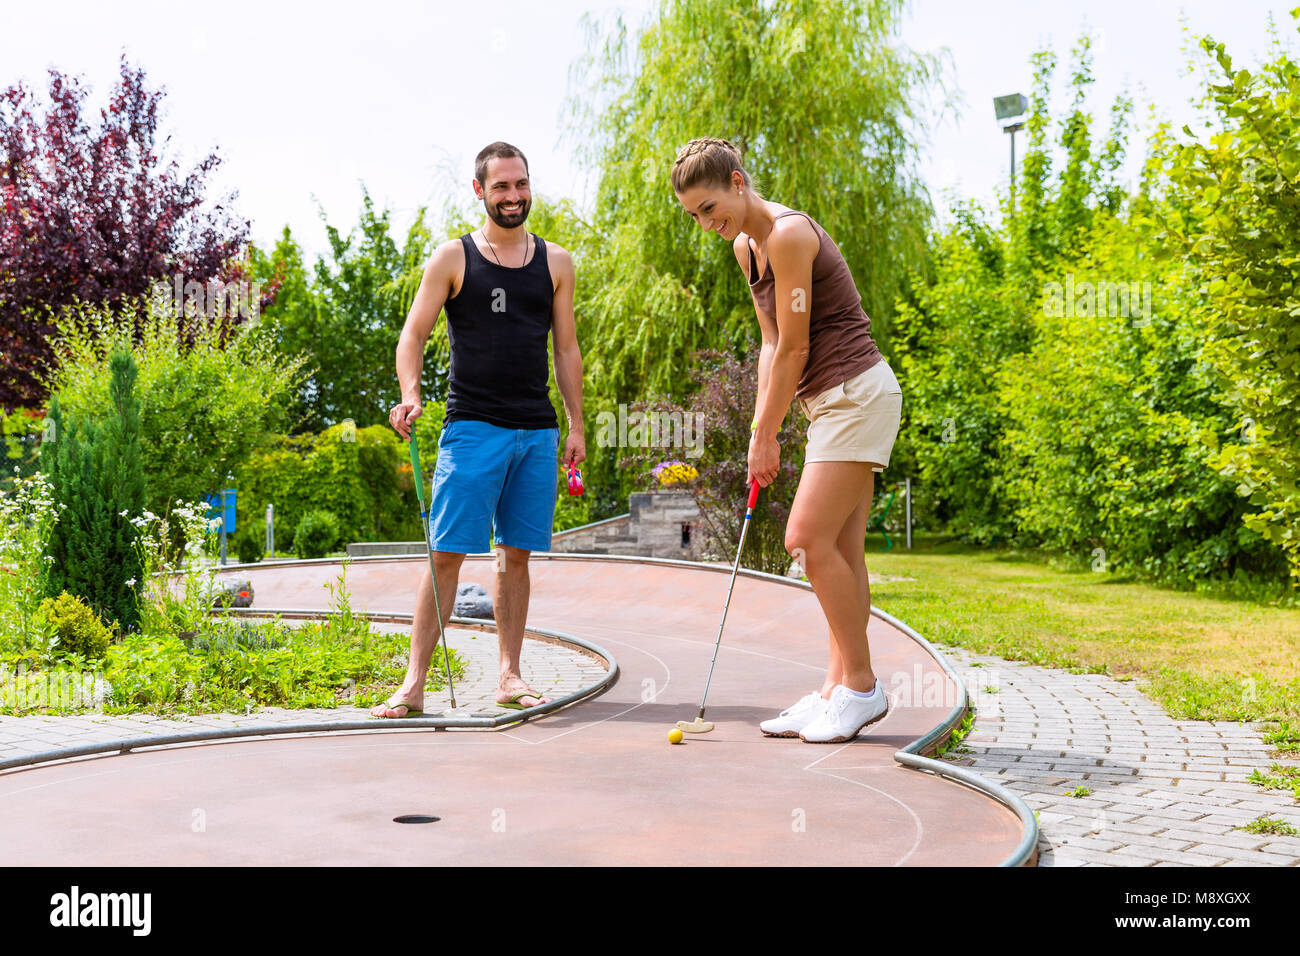 Couple playing together miniature golf outdoors Stock Photo